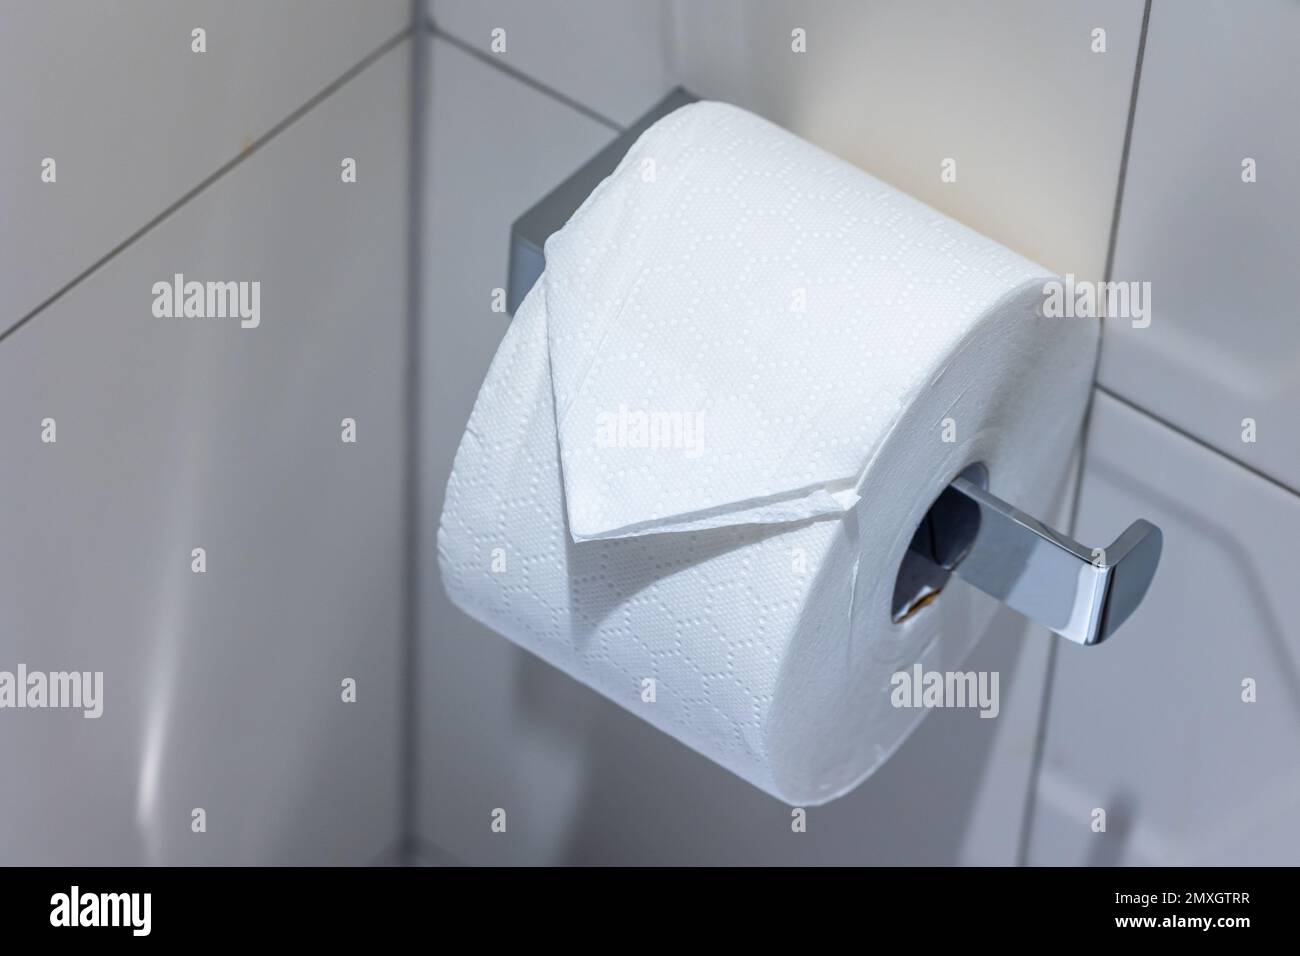 New roll of toilet paper on the holder in the toilet. Toilet finished with white tiles Stock Photo